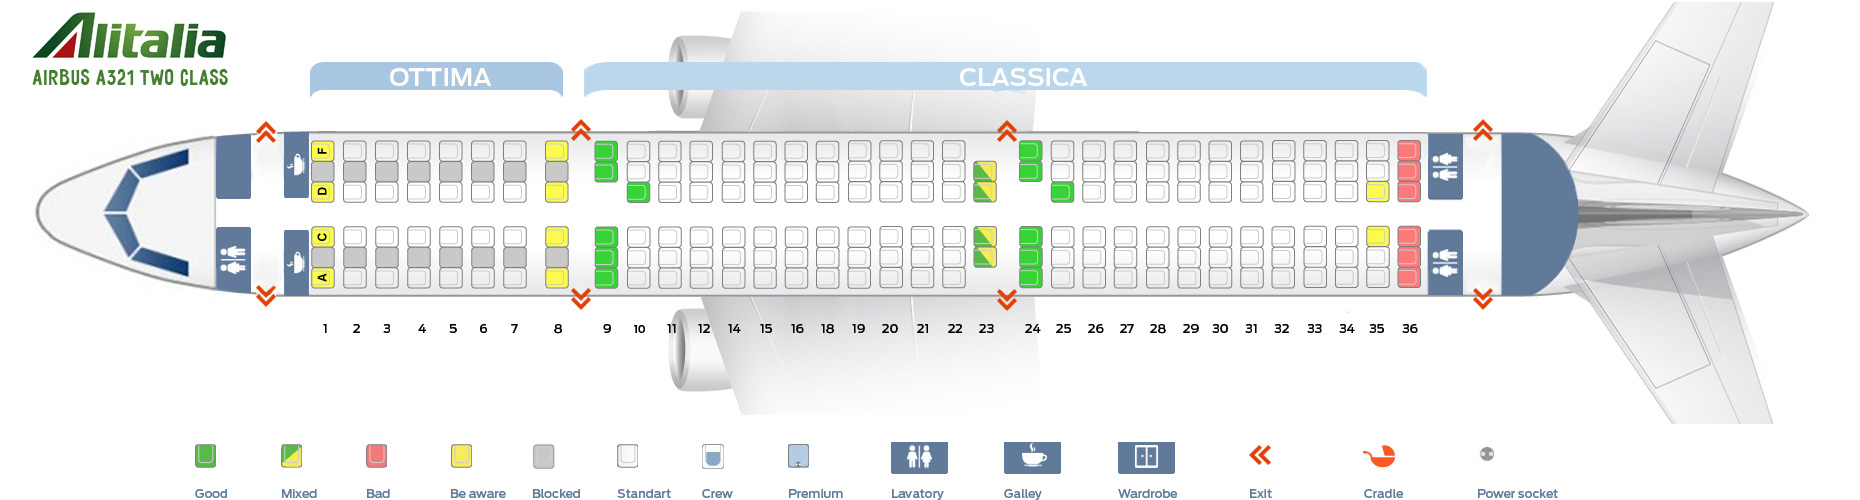 Seat map Airbus A321100 Alitalia. Best seats in the plane